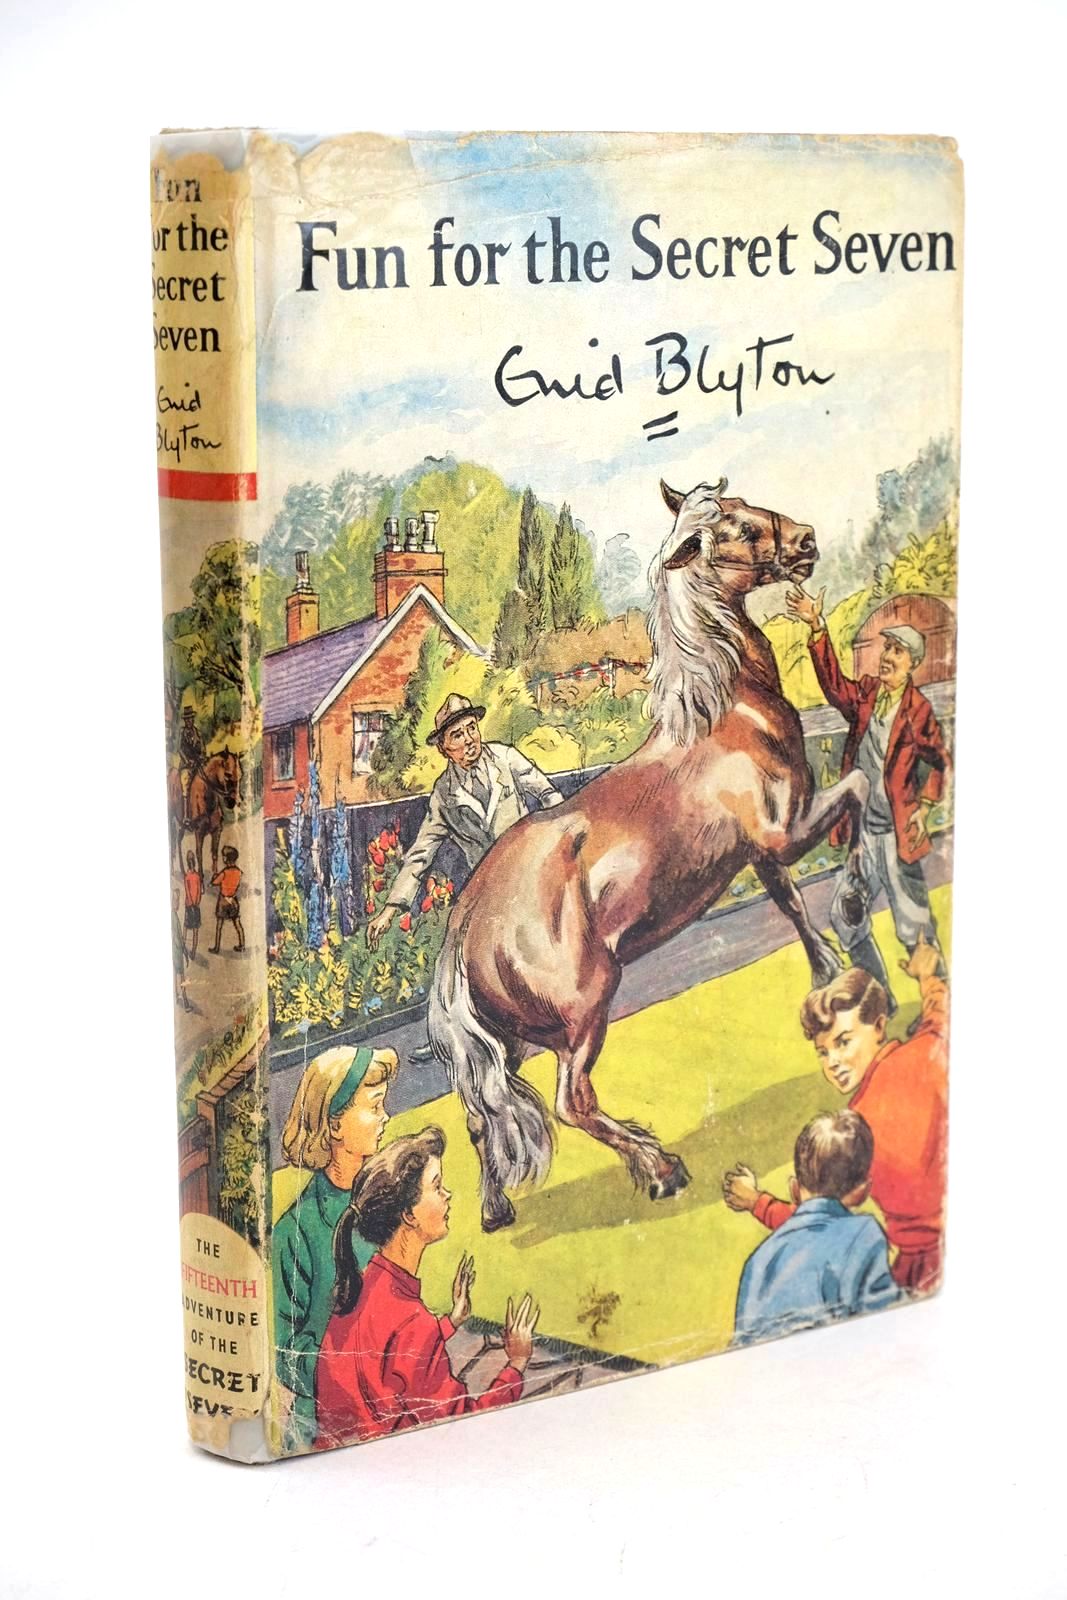 Photo of FUN FOR THE SECRET SEVEN written by Blyton, Enid illustrated by Sharrocks, Burgess published by Brockhampton Press Ltd. (STOCK CODE: 1326876)  for sale by Stella & Rose's Books